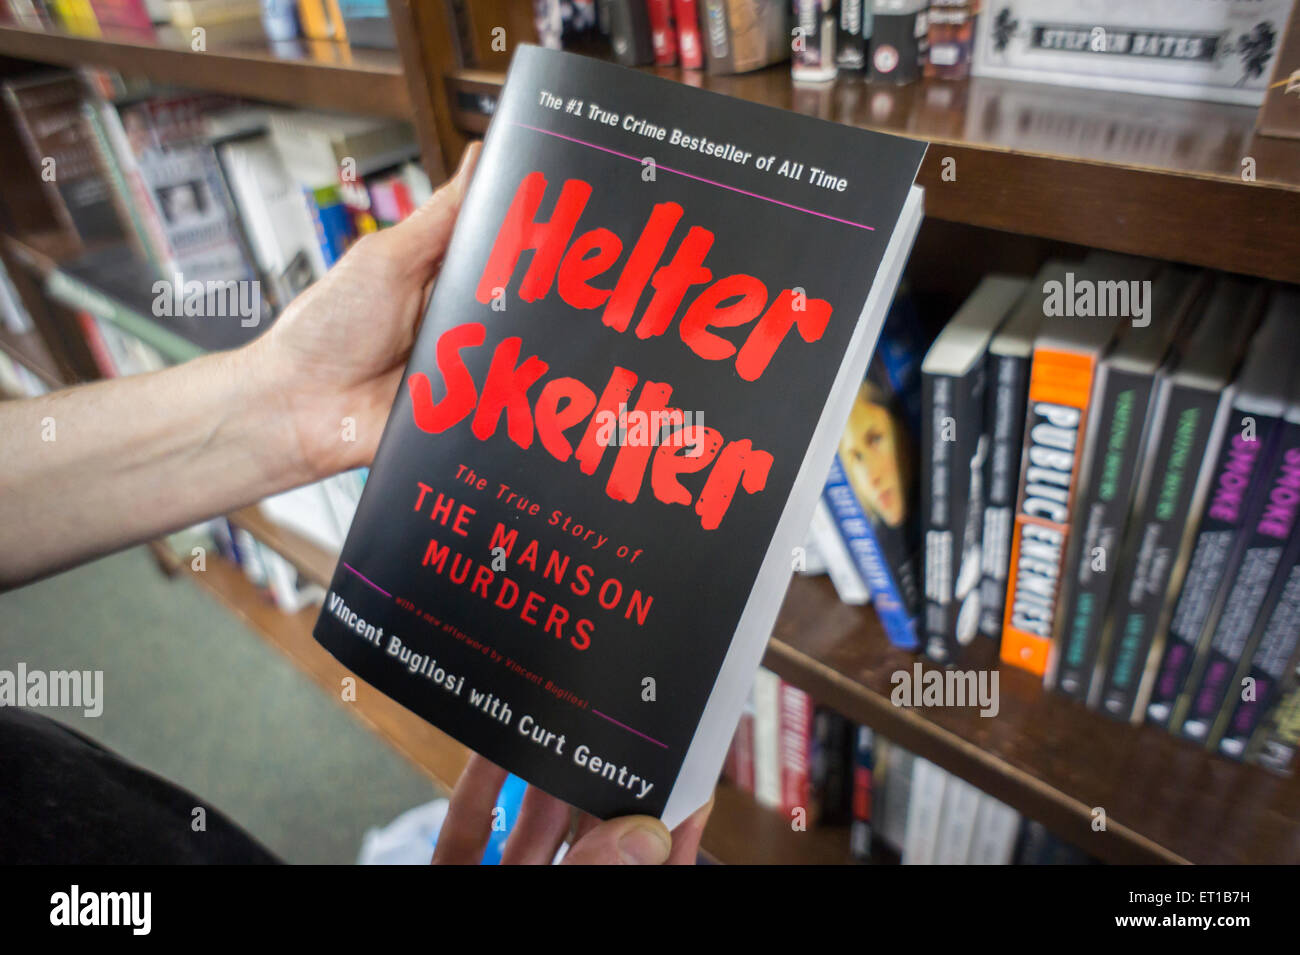 A reader contemplates a copy of 'Helter Skelter', the story of the Charles Manson cult murders, by Vincent Bugliosi in a bookstore in New York on Wednesday, June 10, 2015. Bugliosi, who was the prosecutor in the Manson case, won convictions of Manson and his followers in the brutal murder of actress Sharon Tate and six other people. Bugliosi died of cancer in Los Angeles at 80. (© Richard B. Levine) Stock Photo